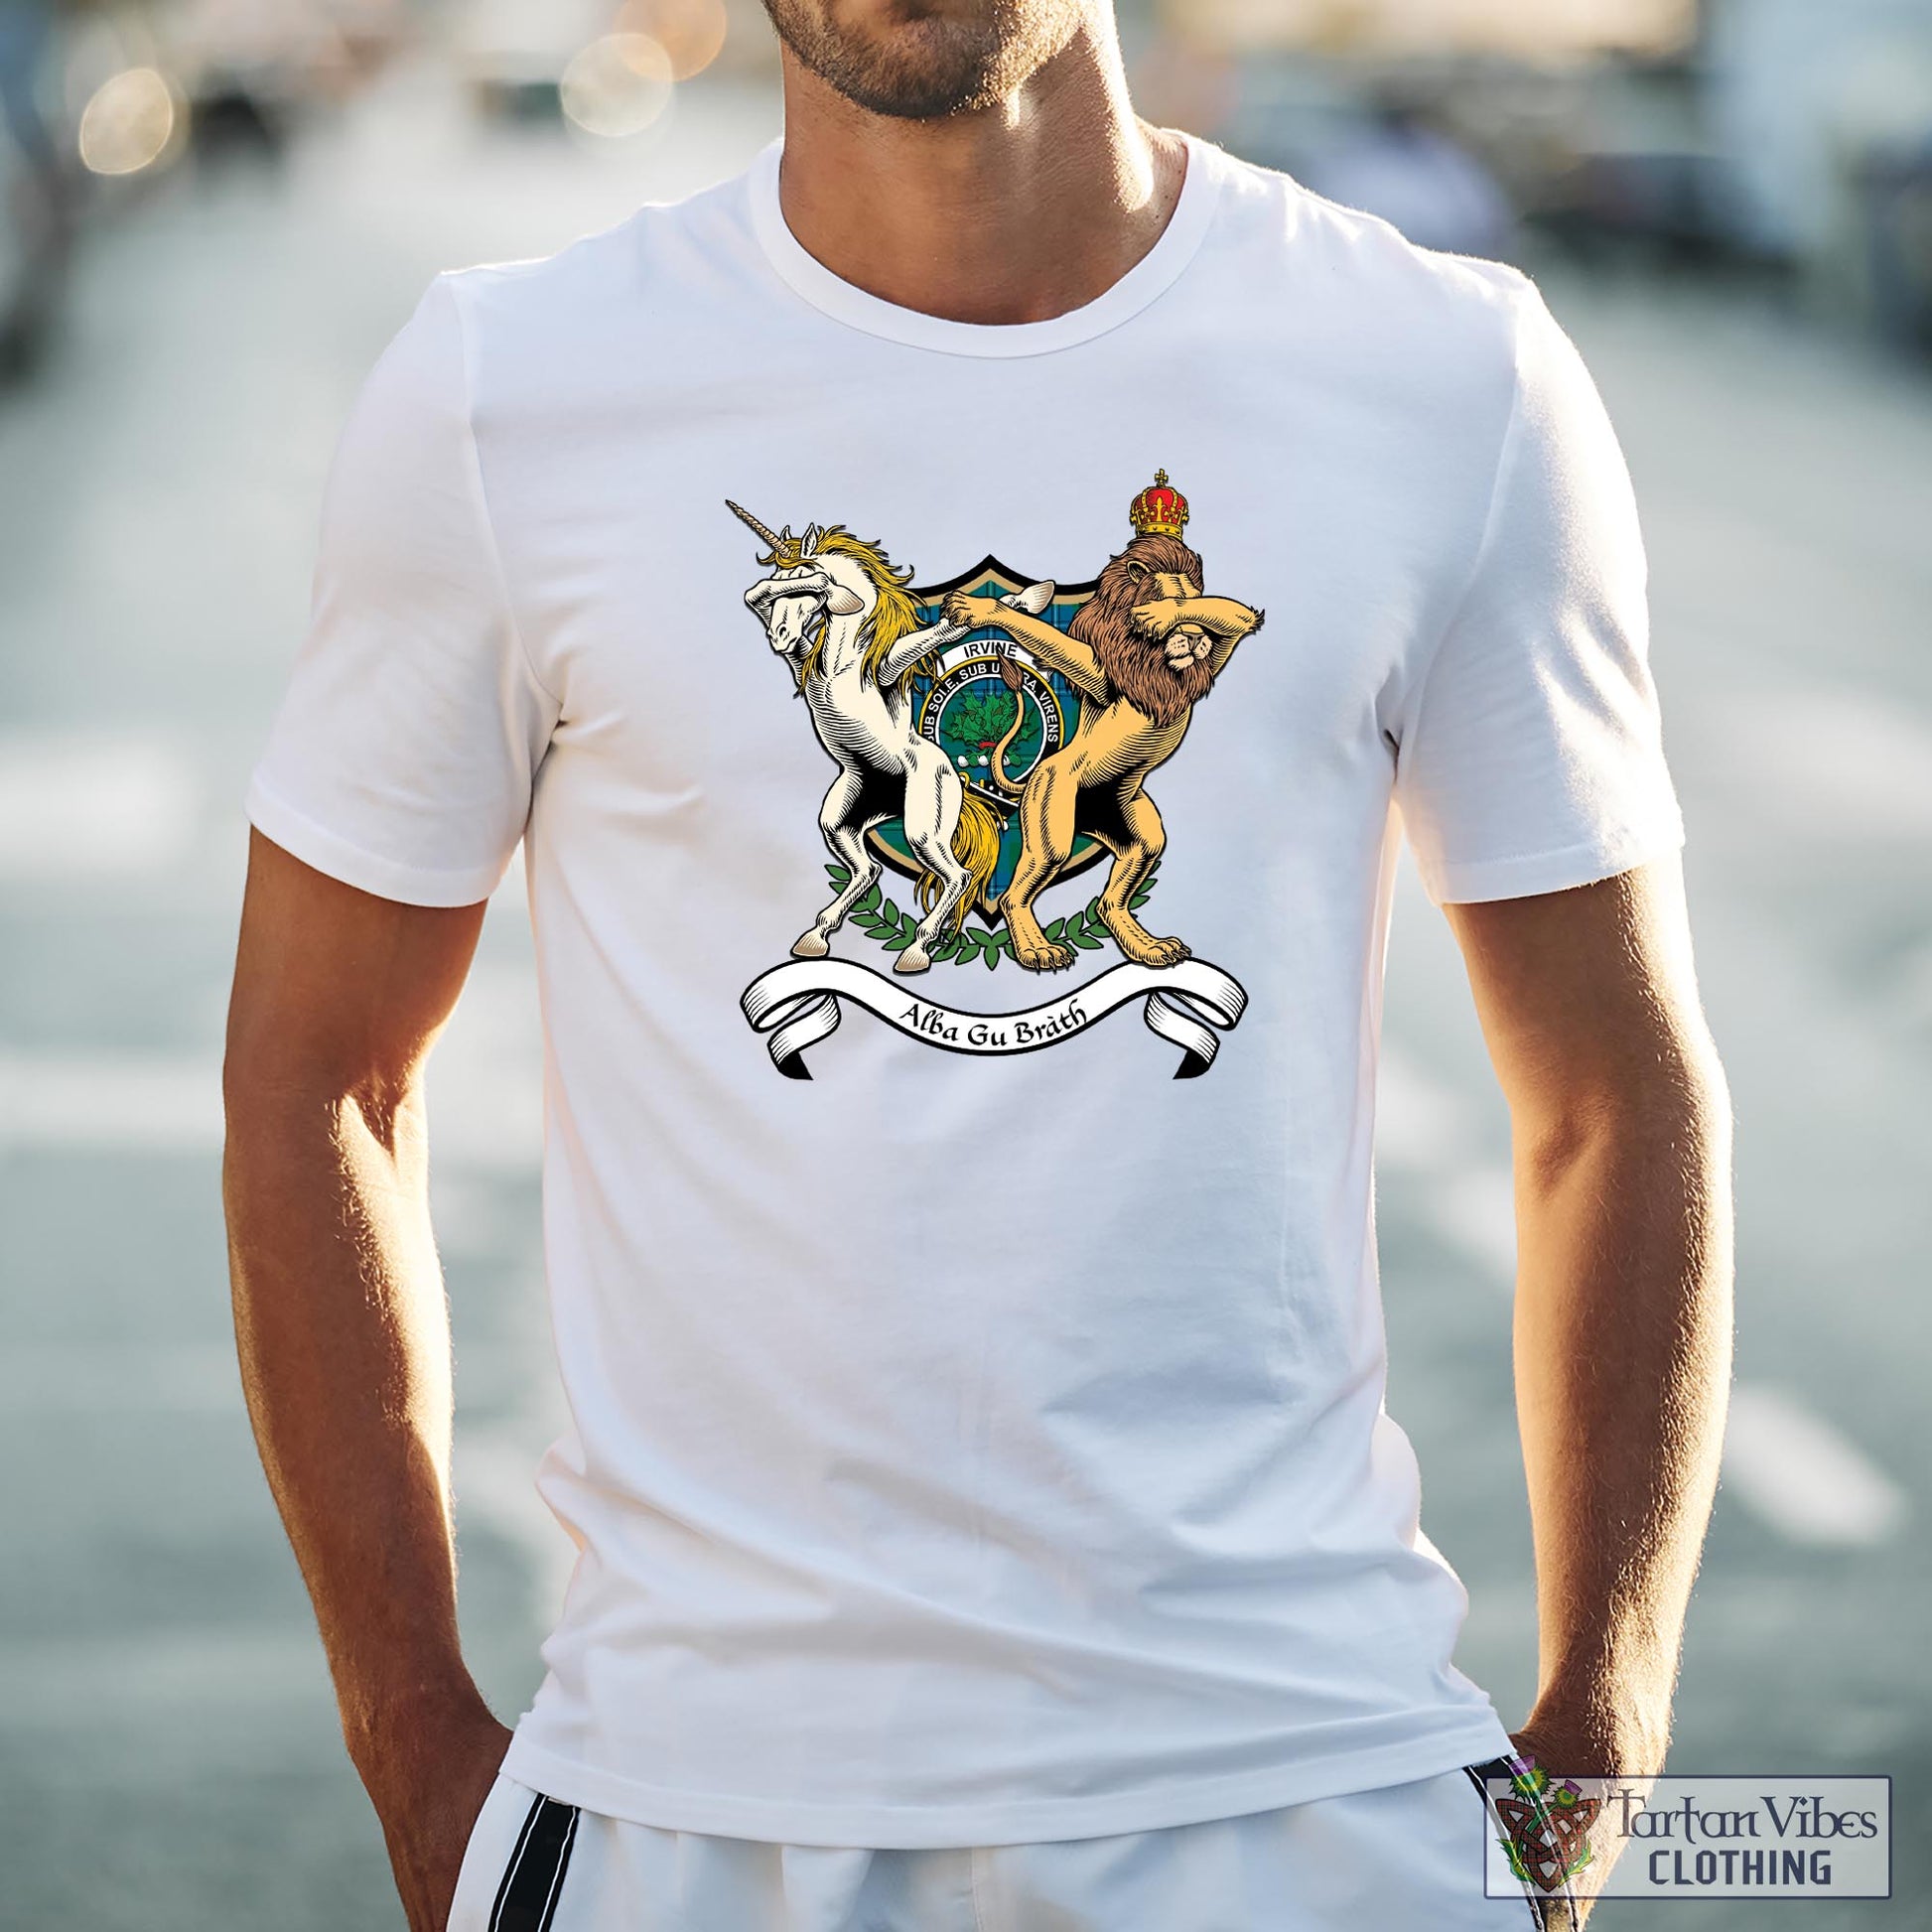 Tartan Vibes Clothing Irvine of Drum Family Crest Cotton Men's T-Shirt with Scotland Royal Coat Of Arm Funny Style